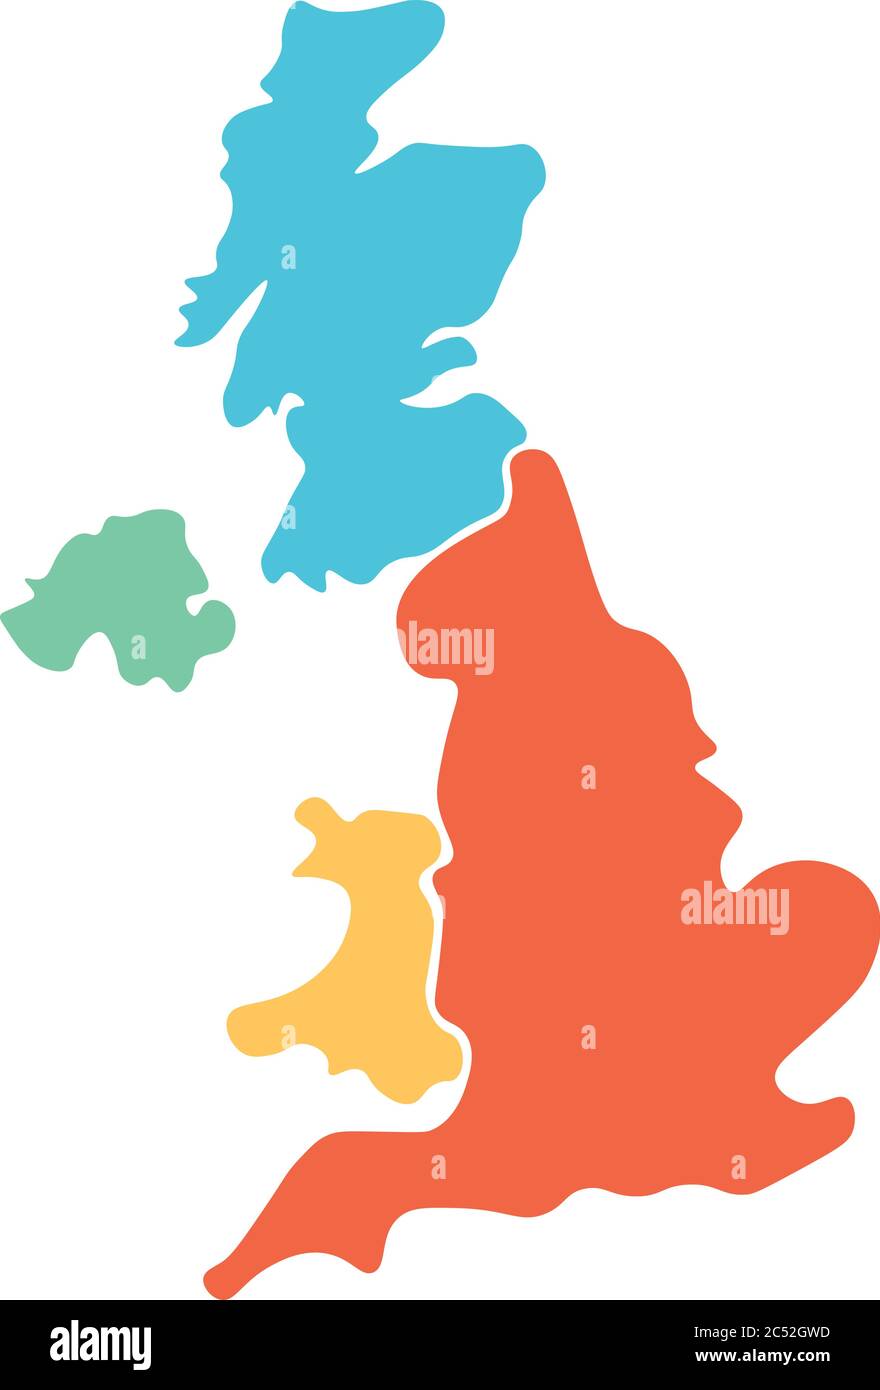 United Kingdom, aka UK, of Great Britain and Northern Ireland hand-drawn blank map. Divided to four countries in different colors - England, Wales, Scotland and NI. Simple flat vector illustration. Stock Vector